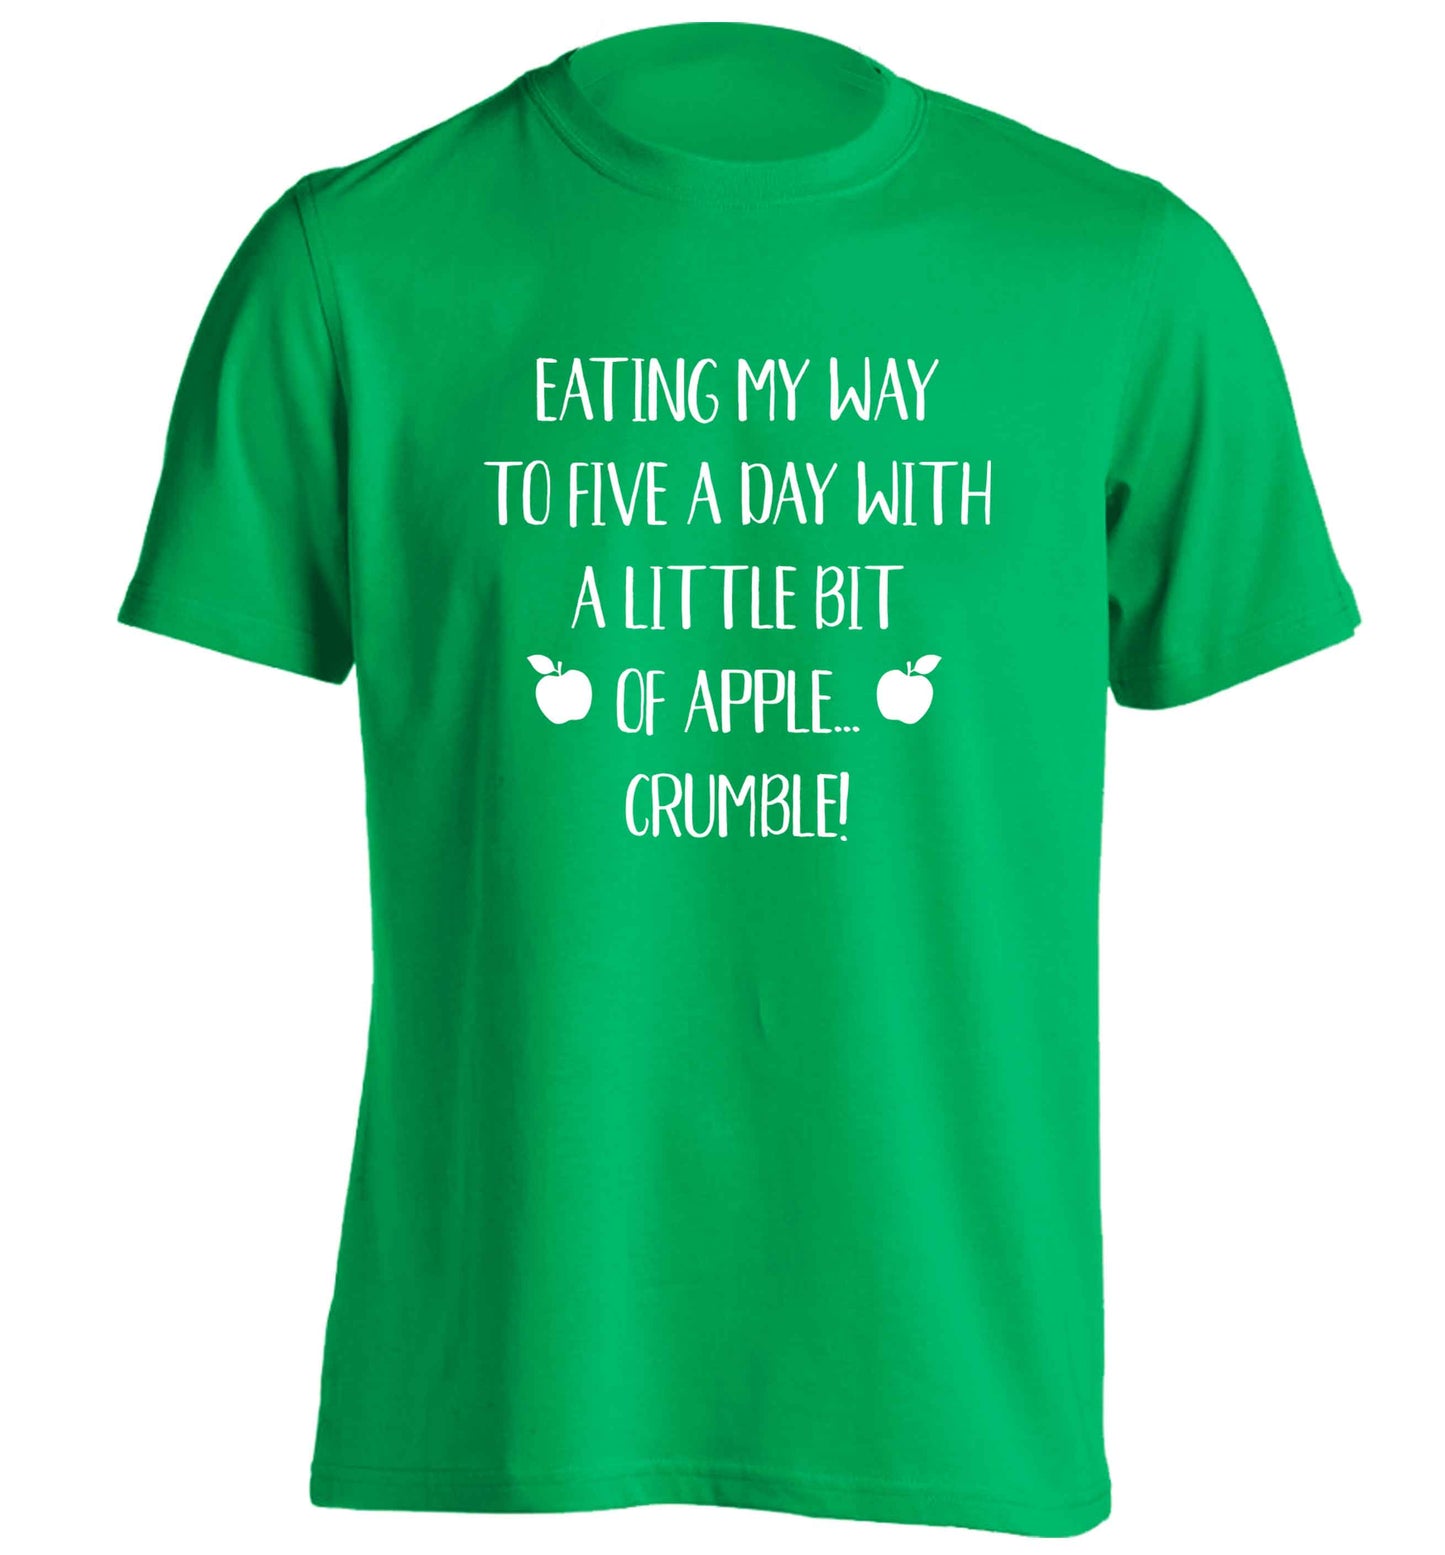 Eating my way to five a day with a little bit of apple crumble adults unisex green Tshirt 2XL